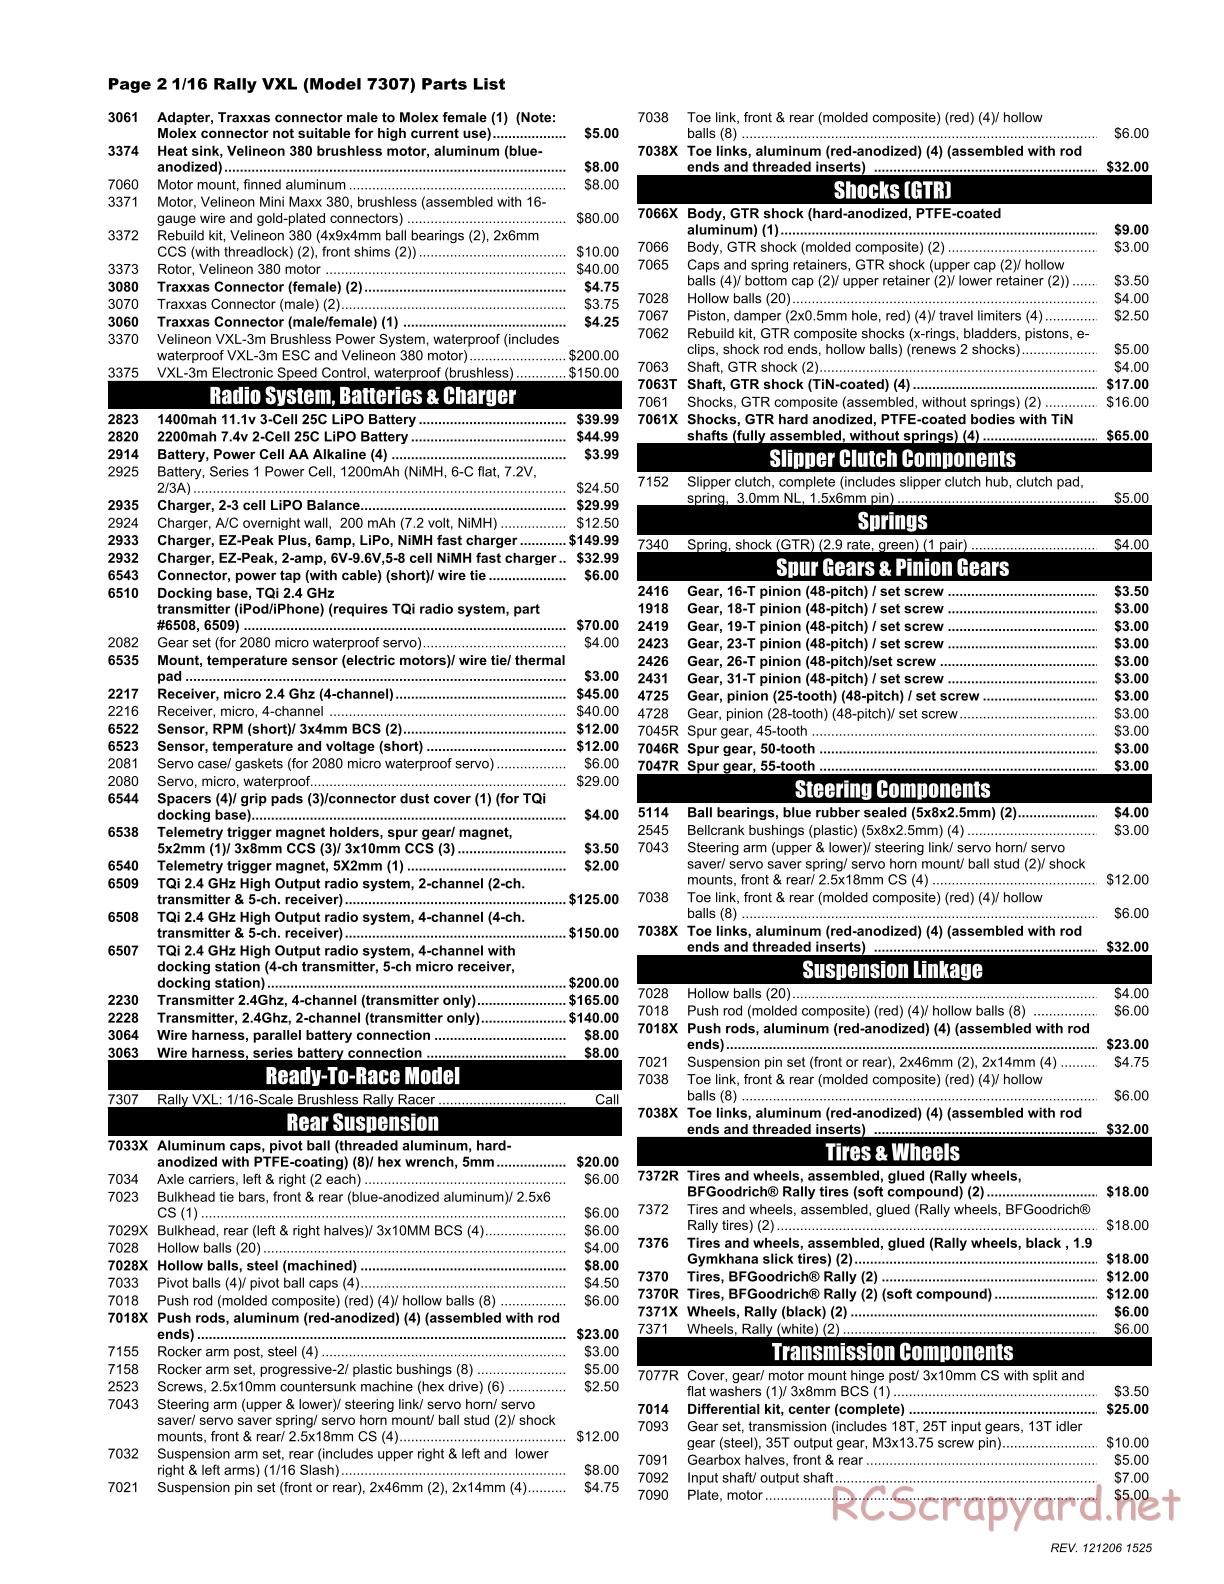 Traxxas - 1/16 Rally VXL (2010) - Parts List - Page 2